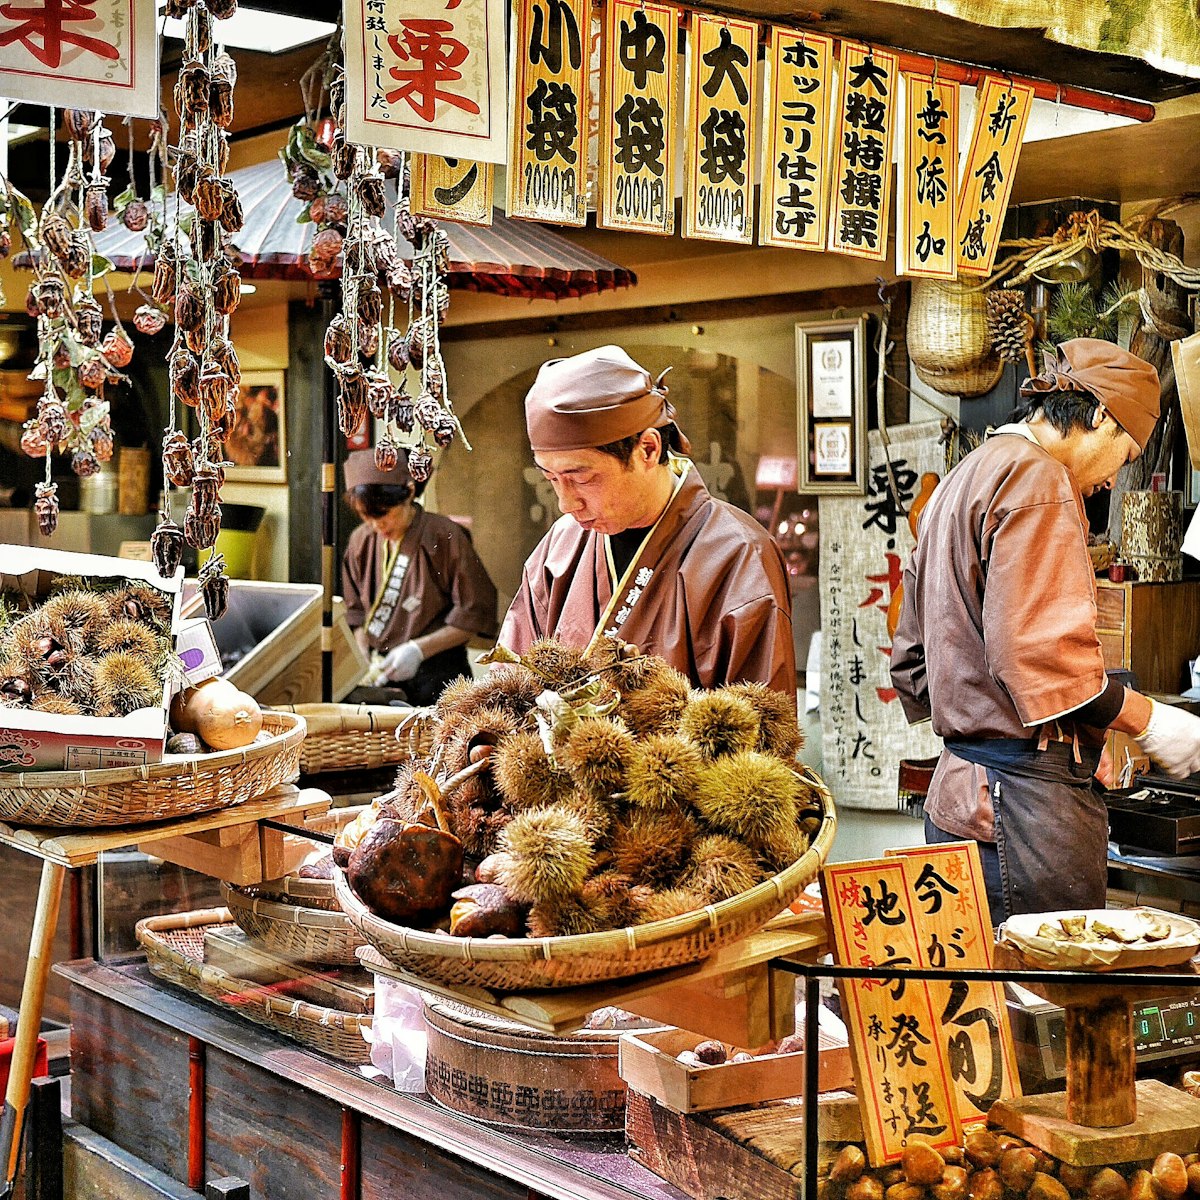 Vendors prepare chestnuts to sell at Nishiki Market in Kyoto, Japan on 22 November 2016.
1011566827
traditional, street, asian, nutrition, priest, tourism, fruit, editorial, cooking, design, east, tradition, chinese, famous, stall, recommend, sale, asia, vendor, nut, cuisine, chef, color, people, culture, food, castanea, healthy, place, chestnut, travel, vegetable, market, business, tourist, architecture, marron, buy, furniture, decoration, colorful, merchant, city, nishiki market, japan, street food, japanese, sell, kyoto, shop